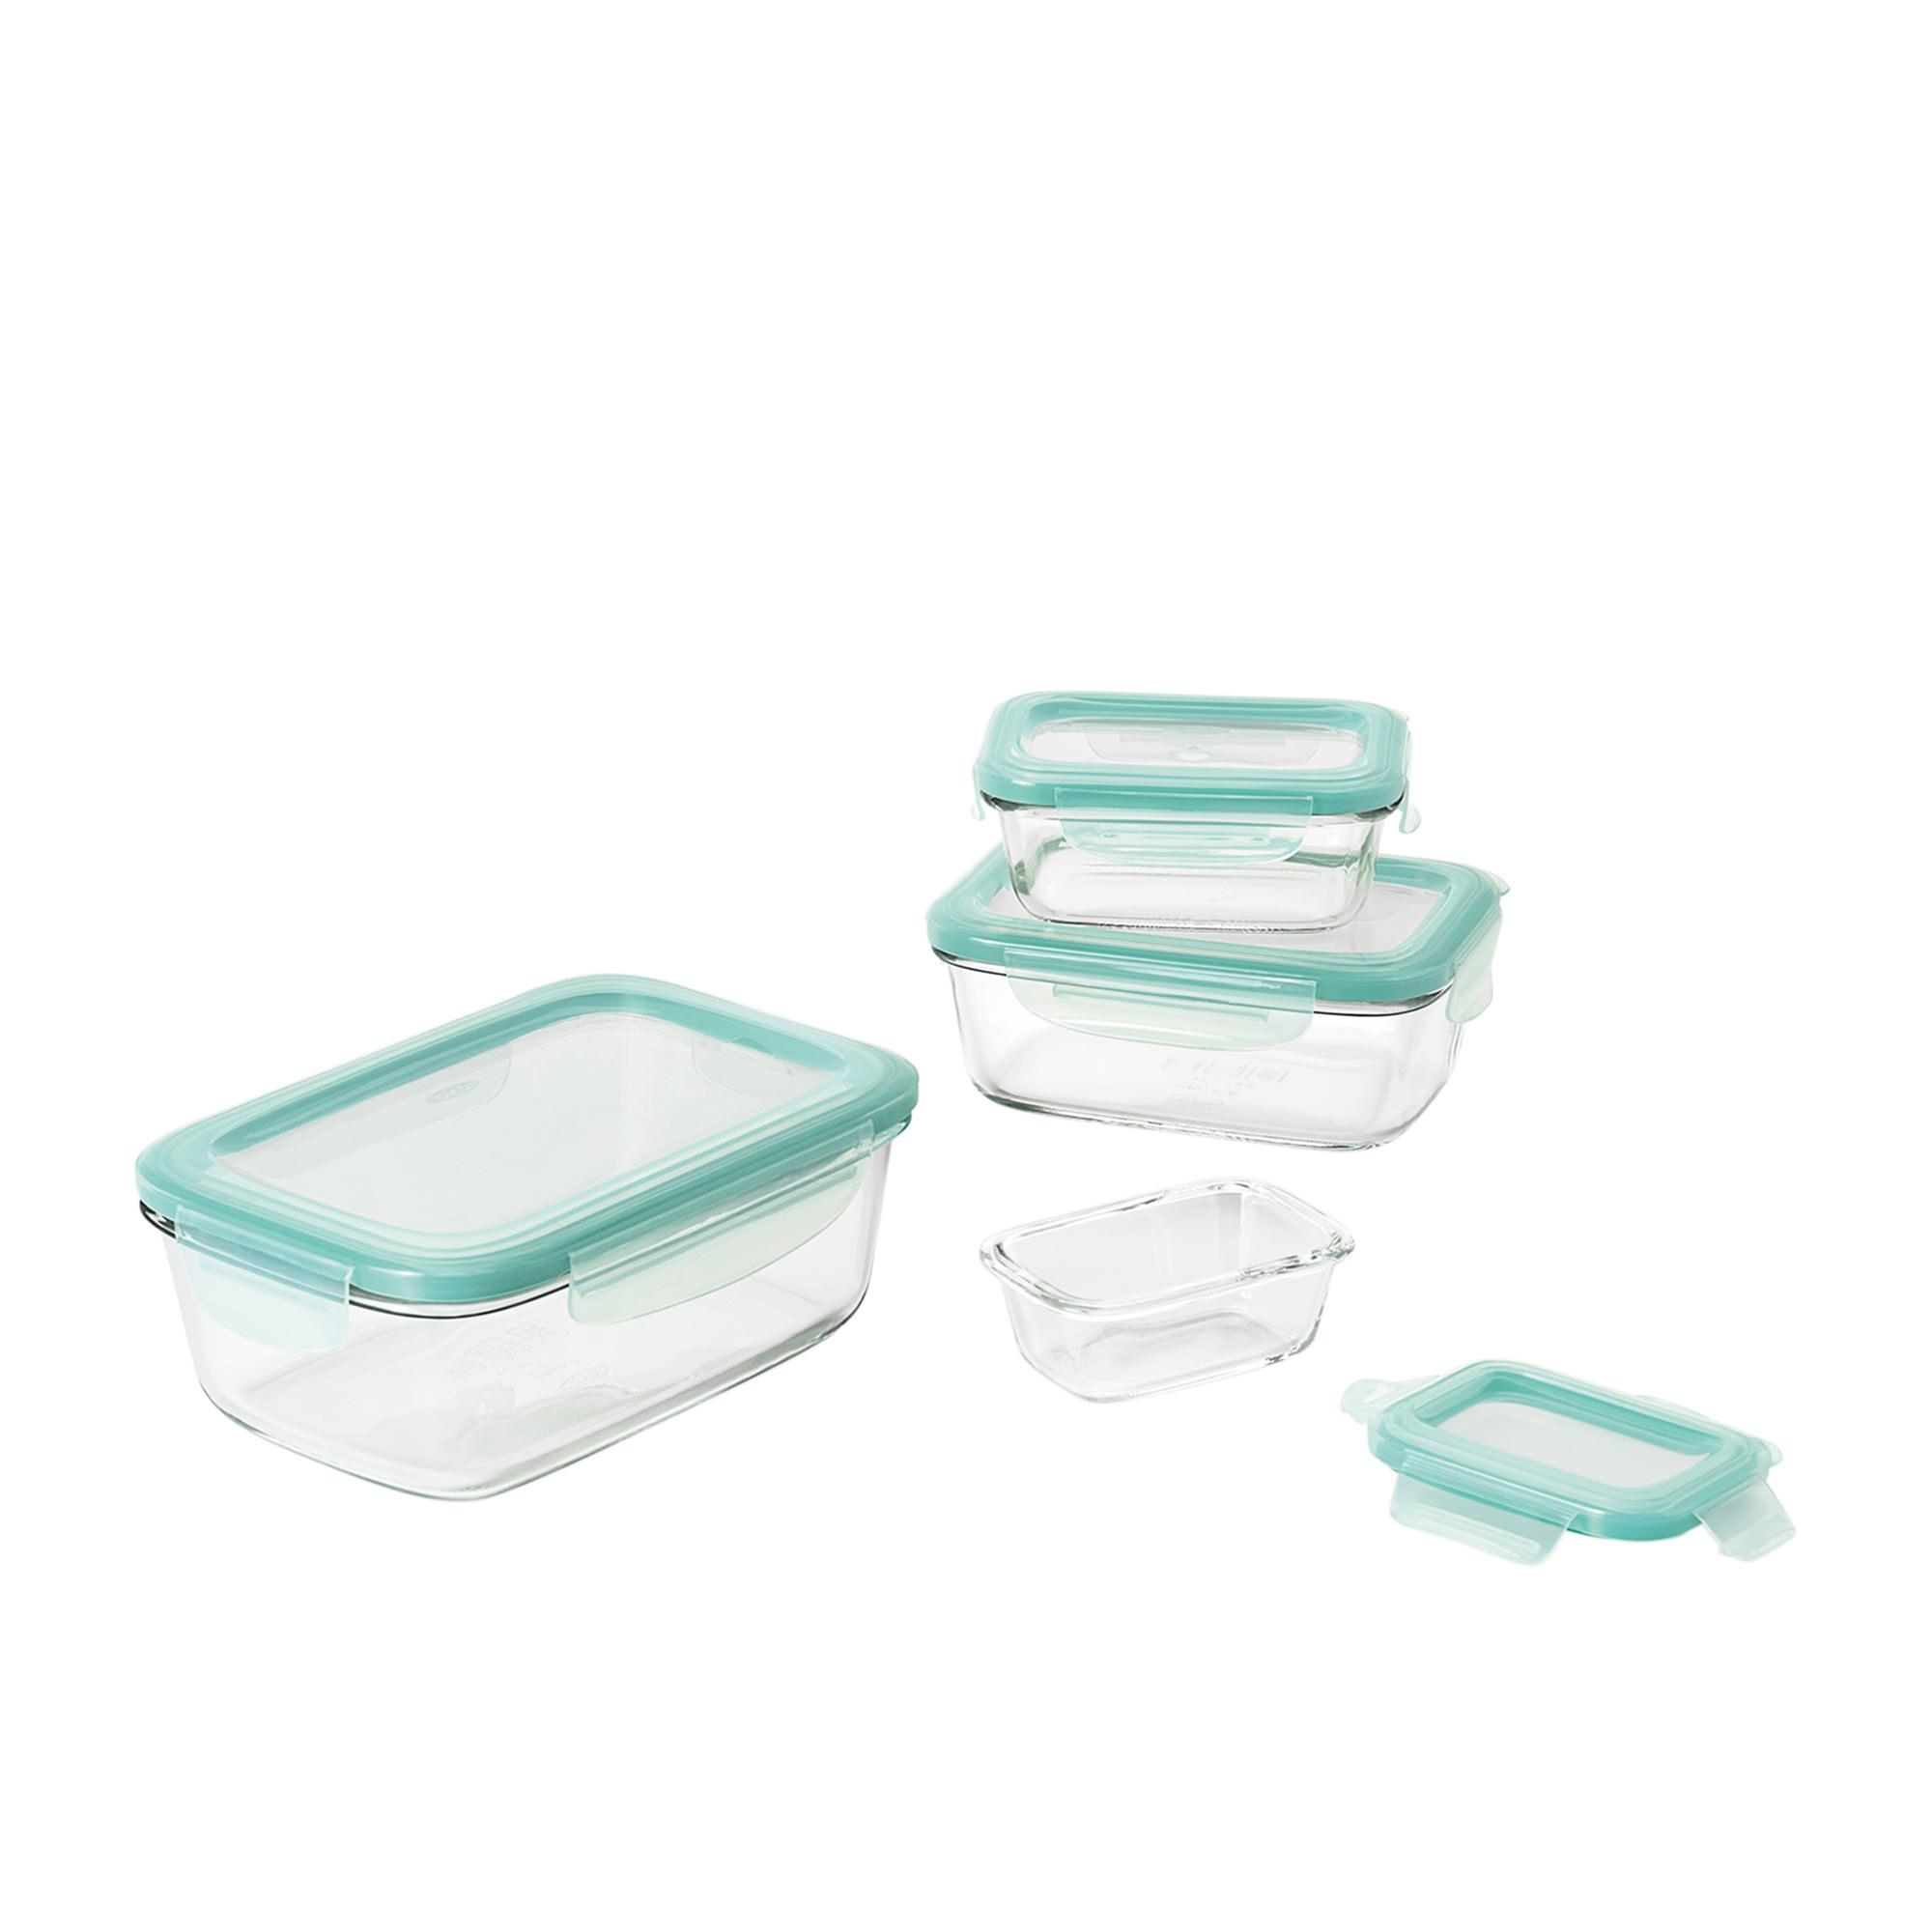 OXO Good Grips Smart Seal Rectangular Glass Container Set 4pc Image 4